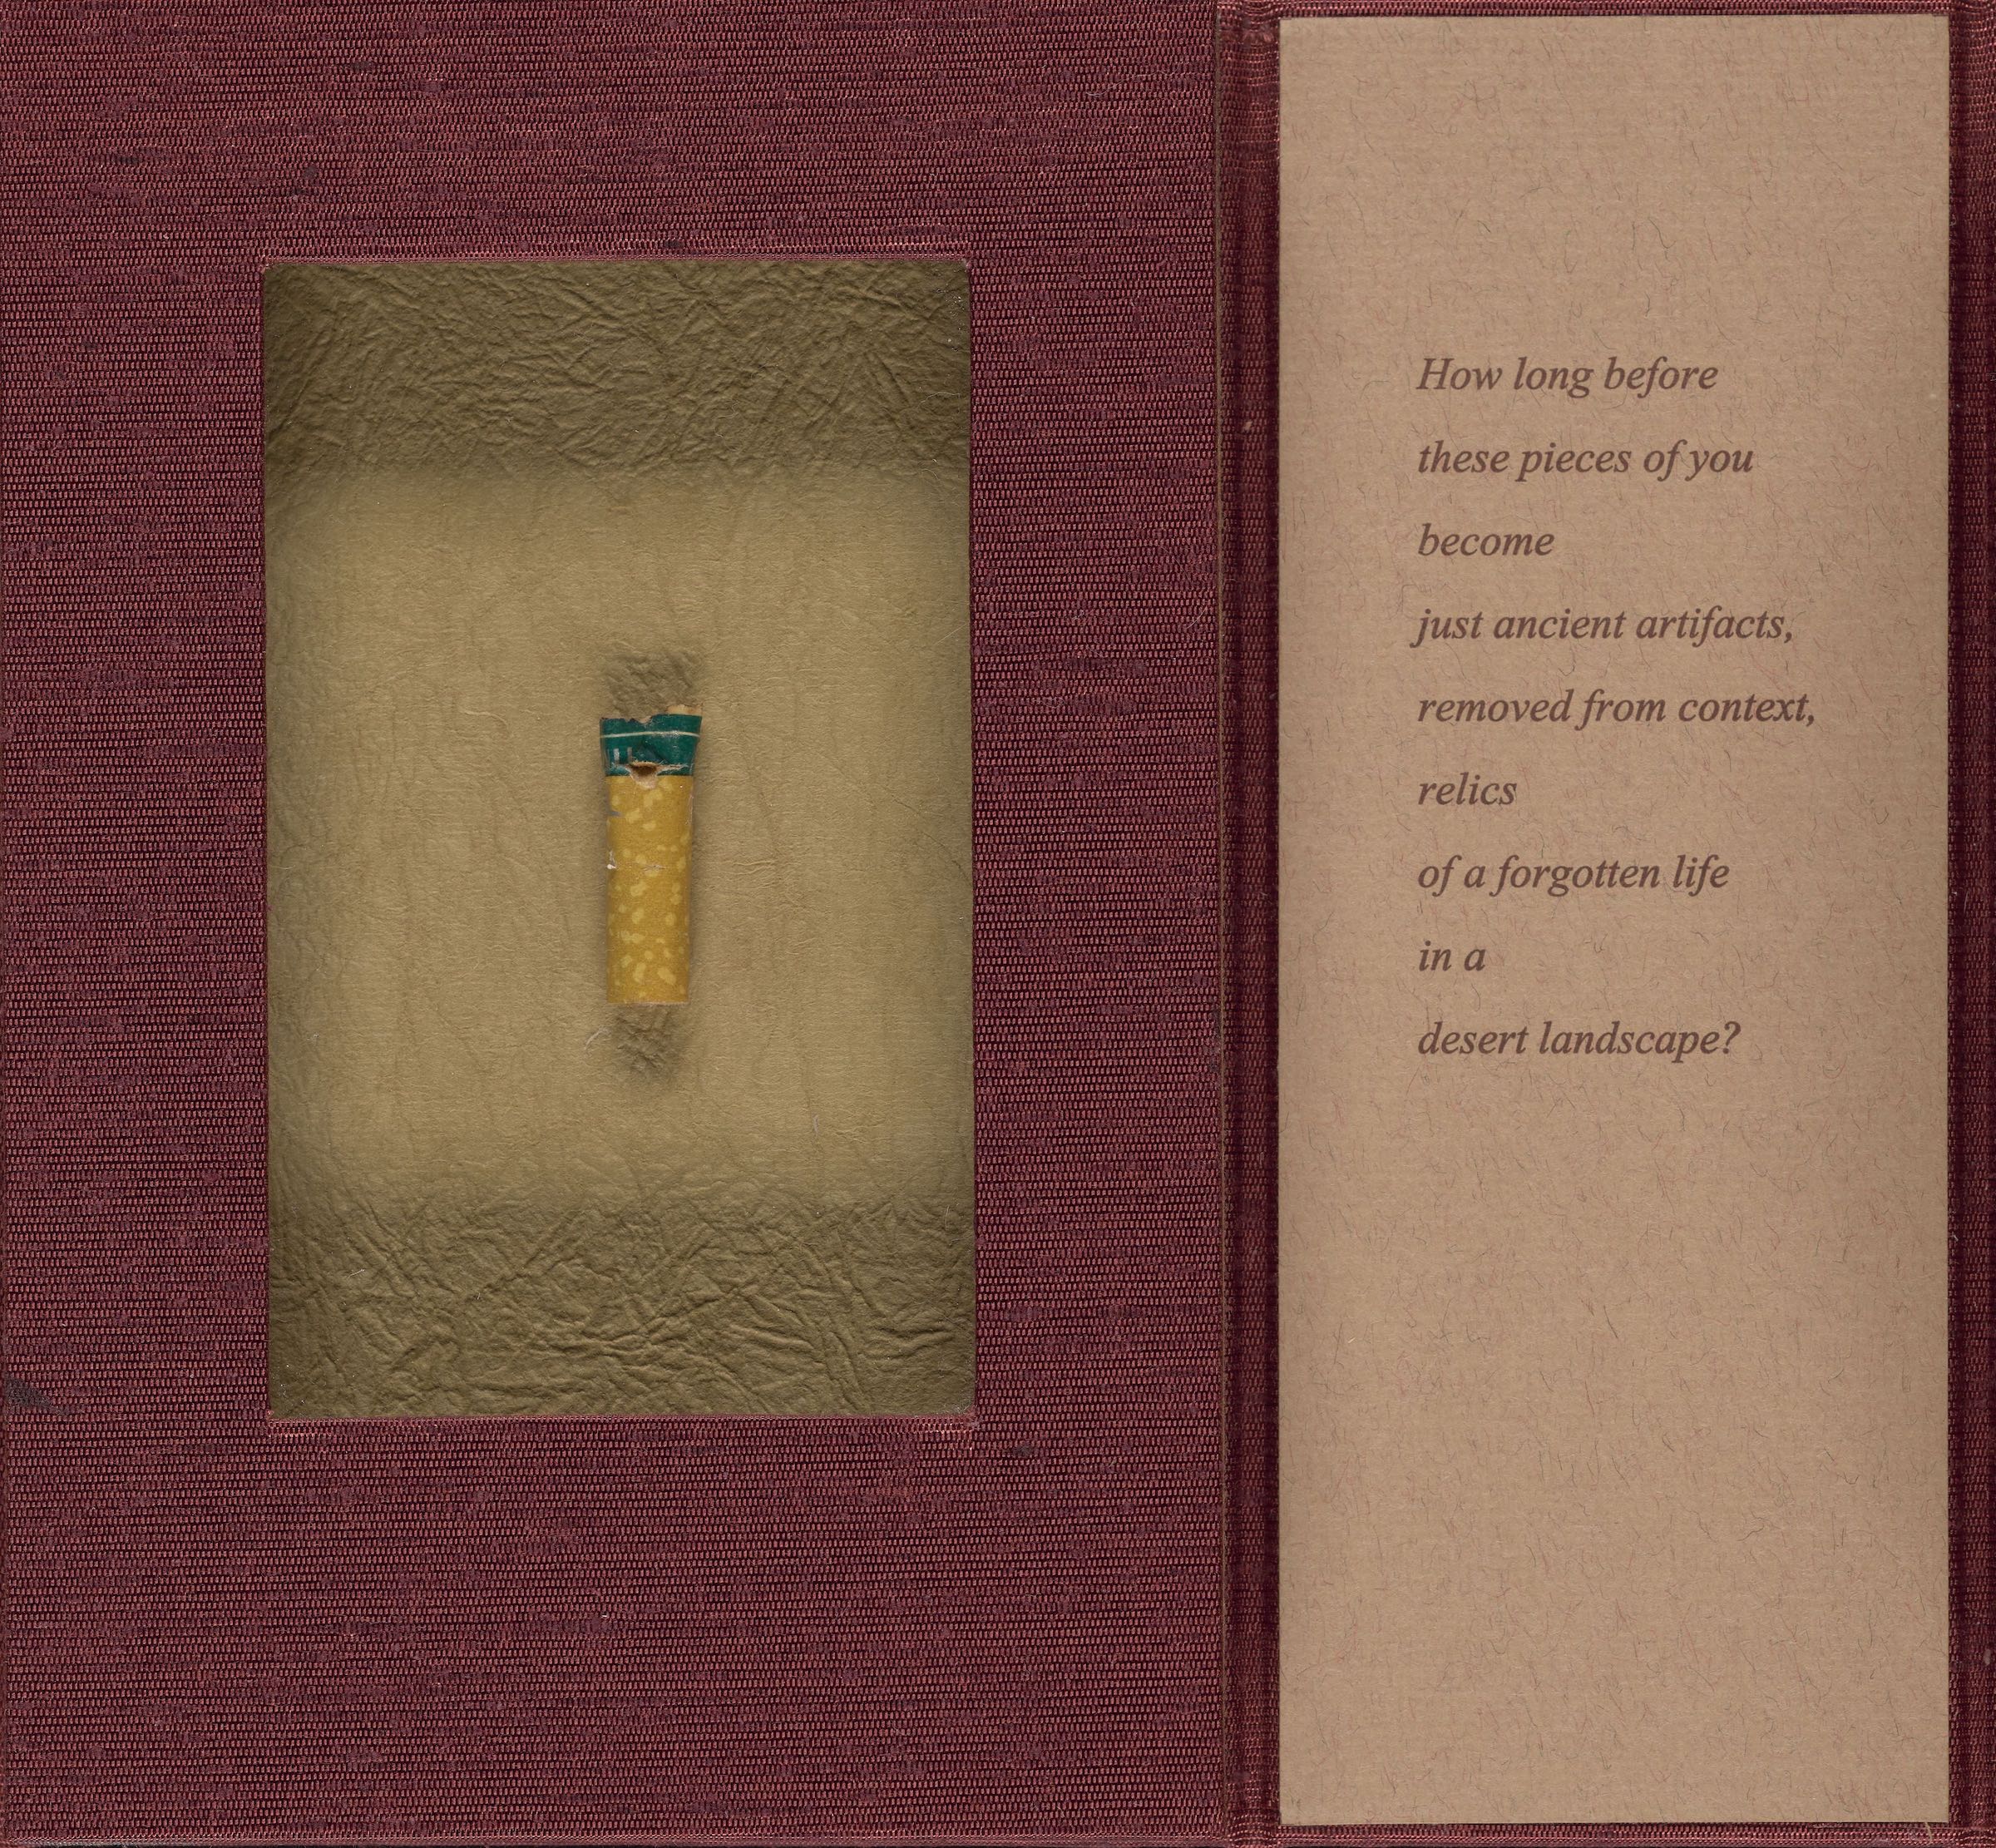 Photo of dark red artist book featuring cigarette butt and text on tan paper